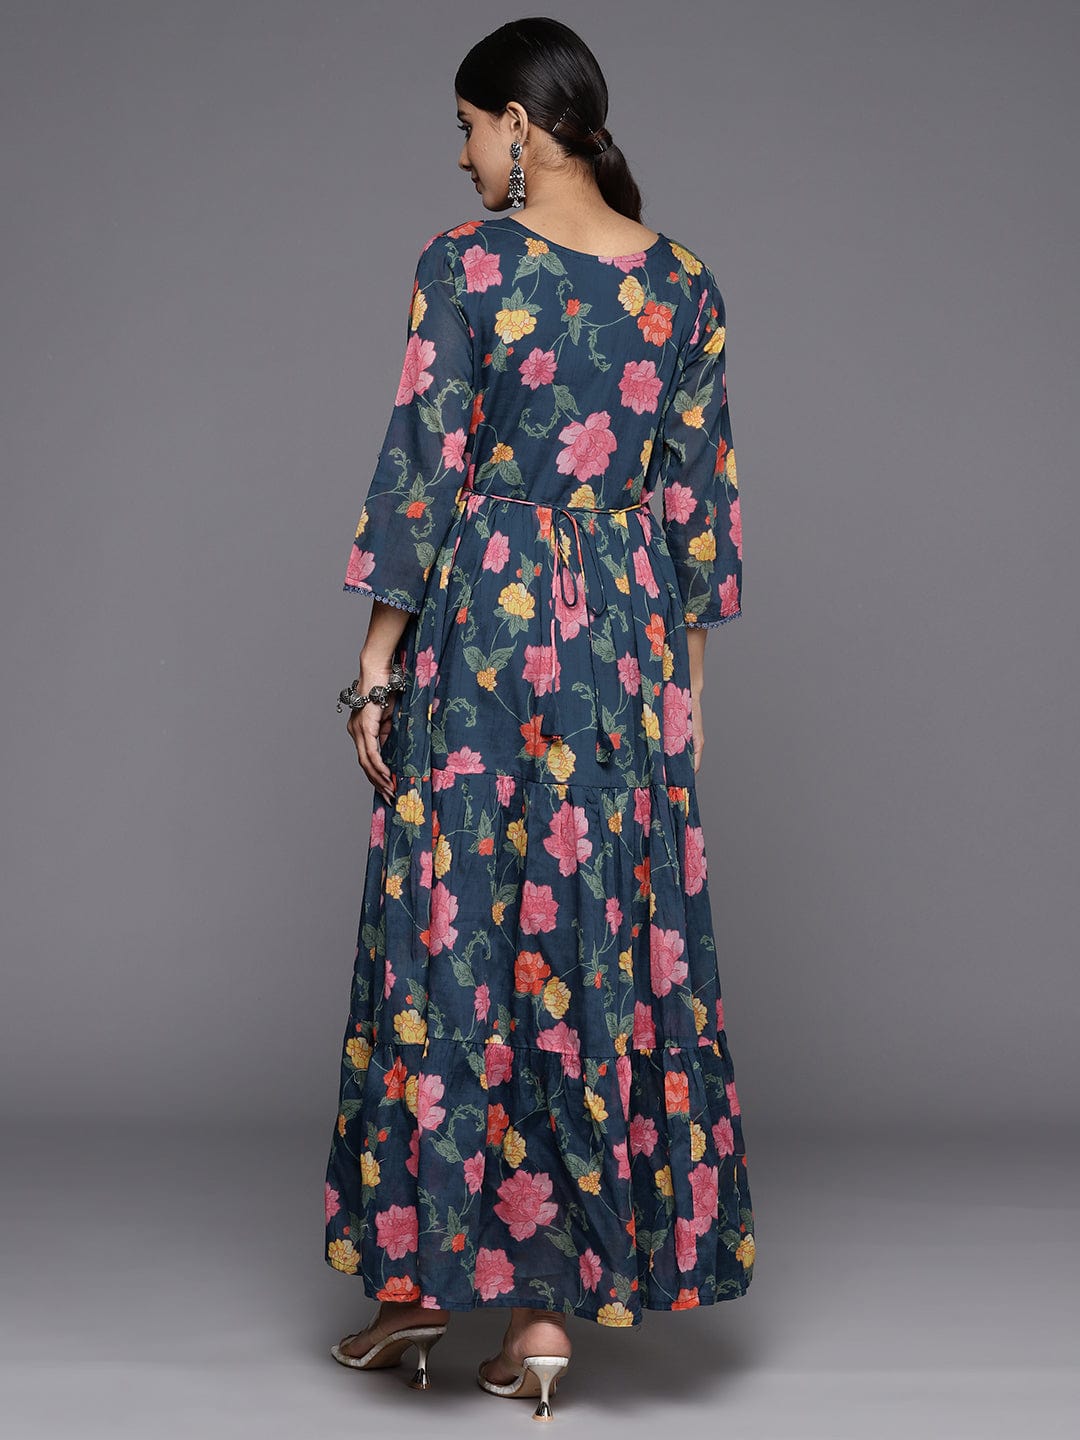 WMNS Long Sleeve Maxi Dress - Floral Print / White / Red